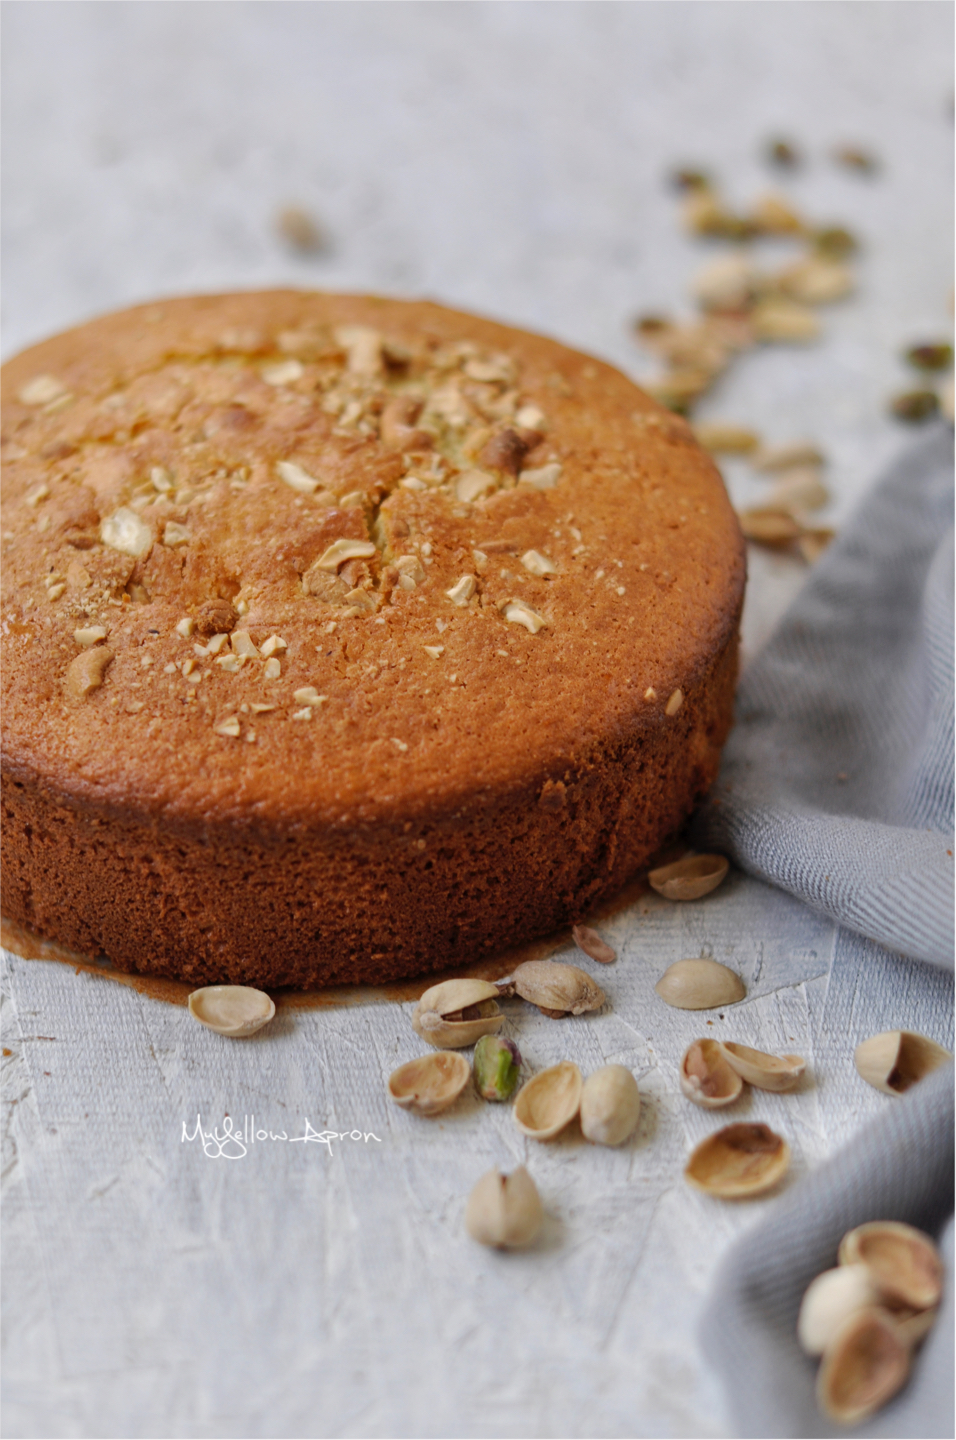 Without any artificial flavoring, this perfect pistachio vanilla sponge cake is perfect for mother's day brunch.